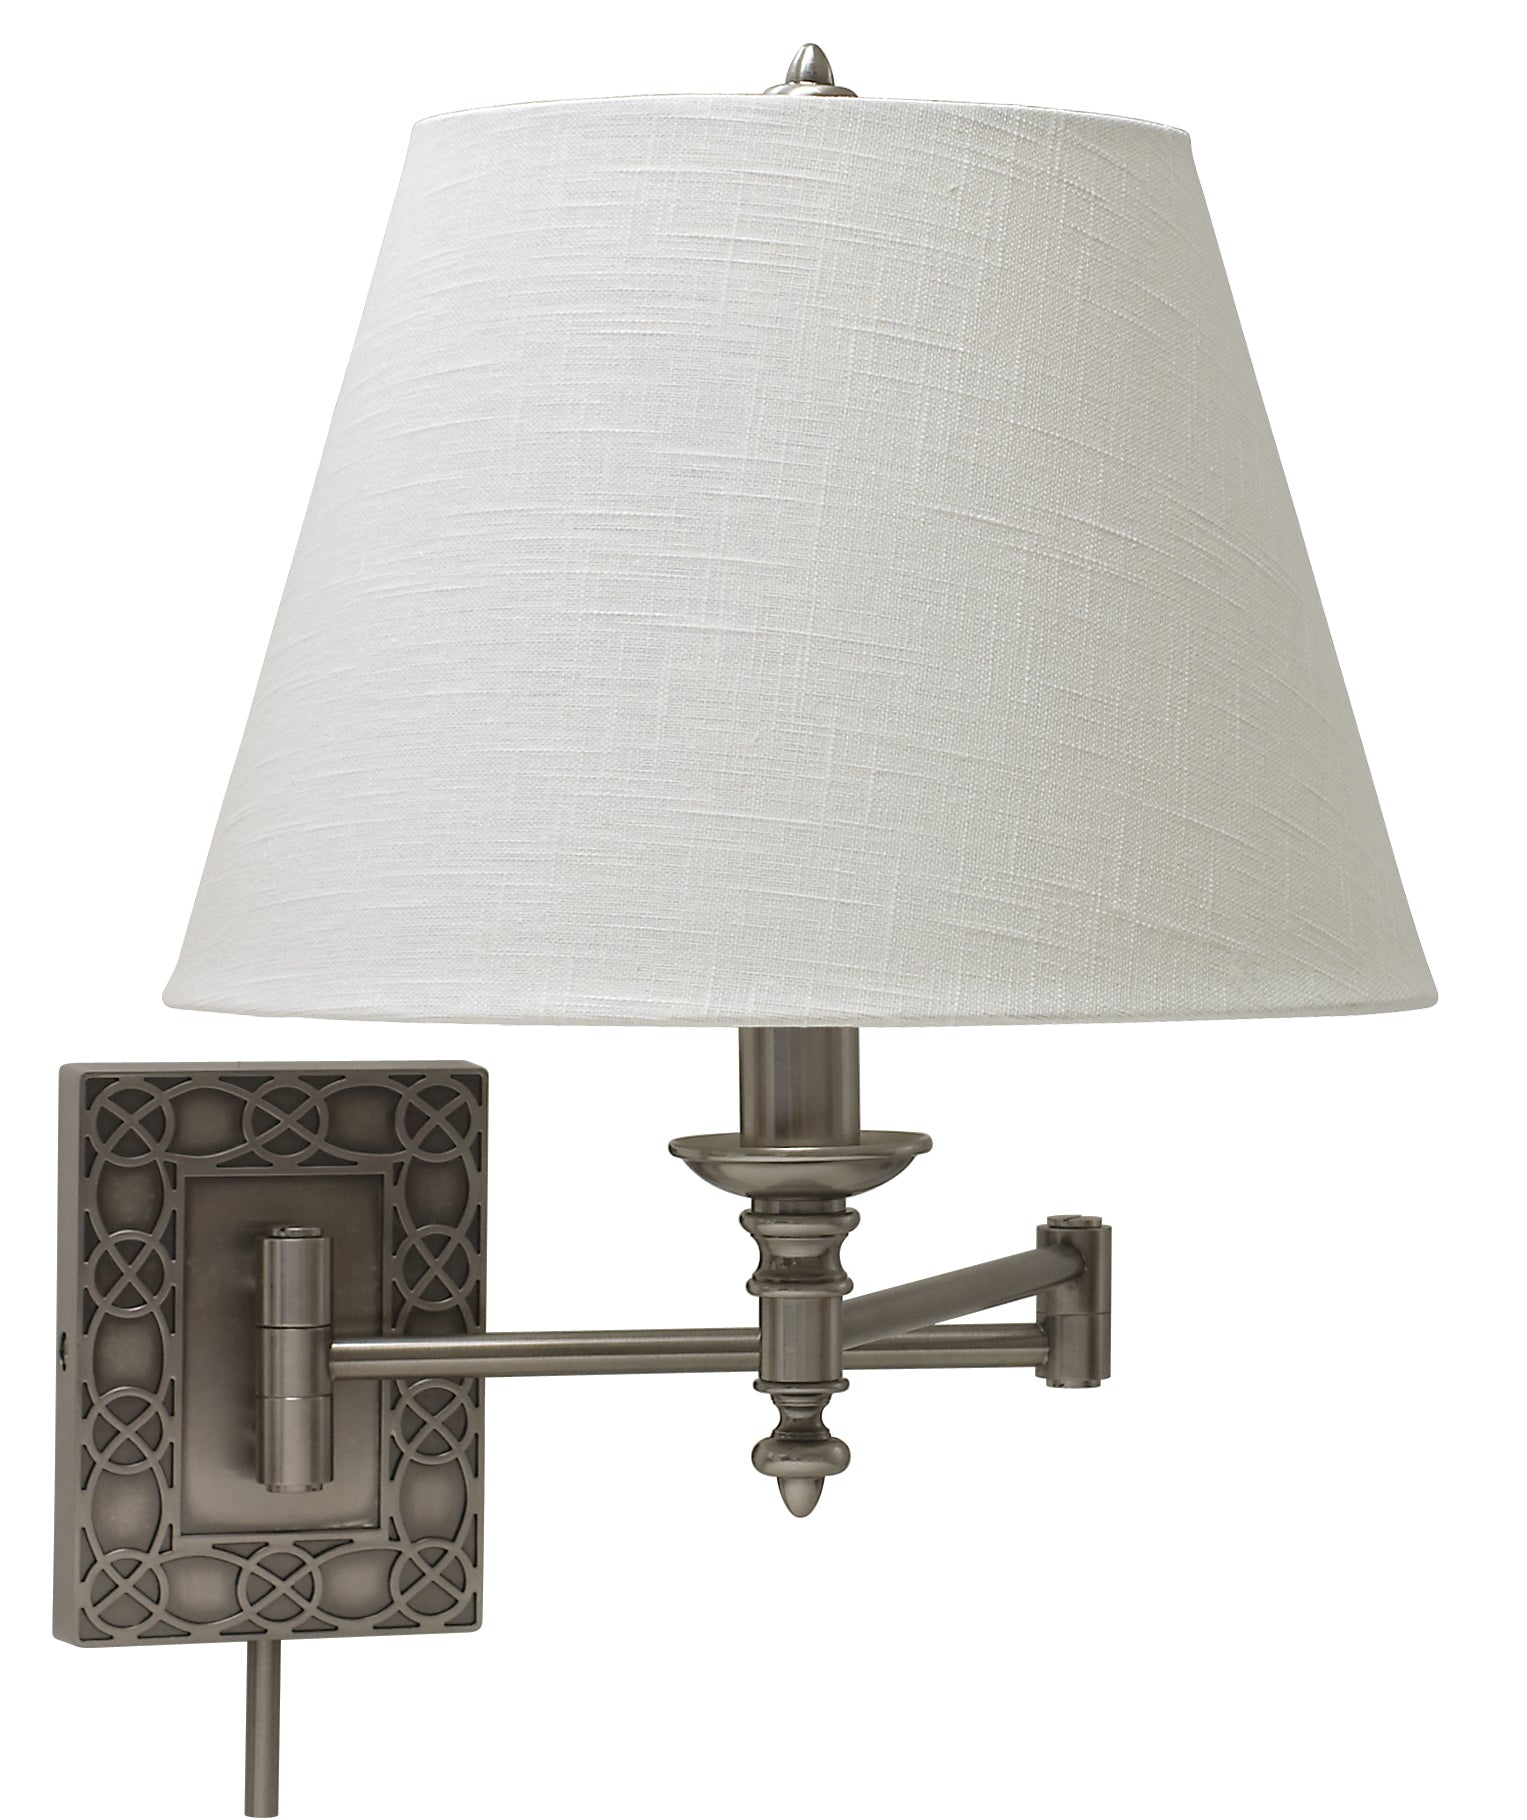 House of Troy Wall Swing Arm Lamp in Antique Silver WS763-AS